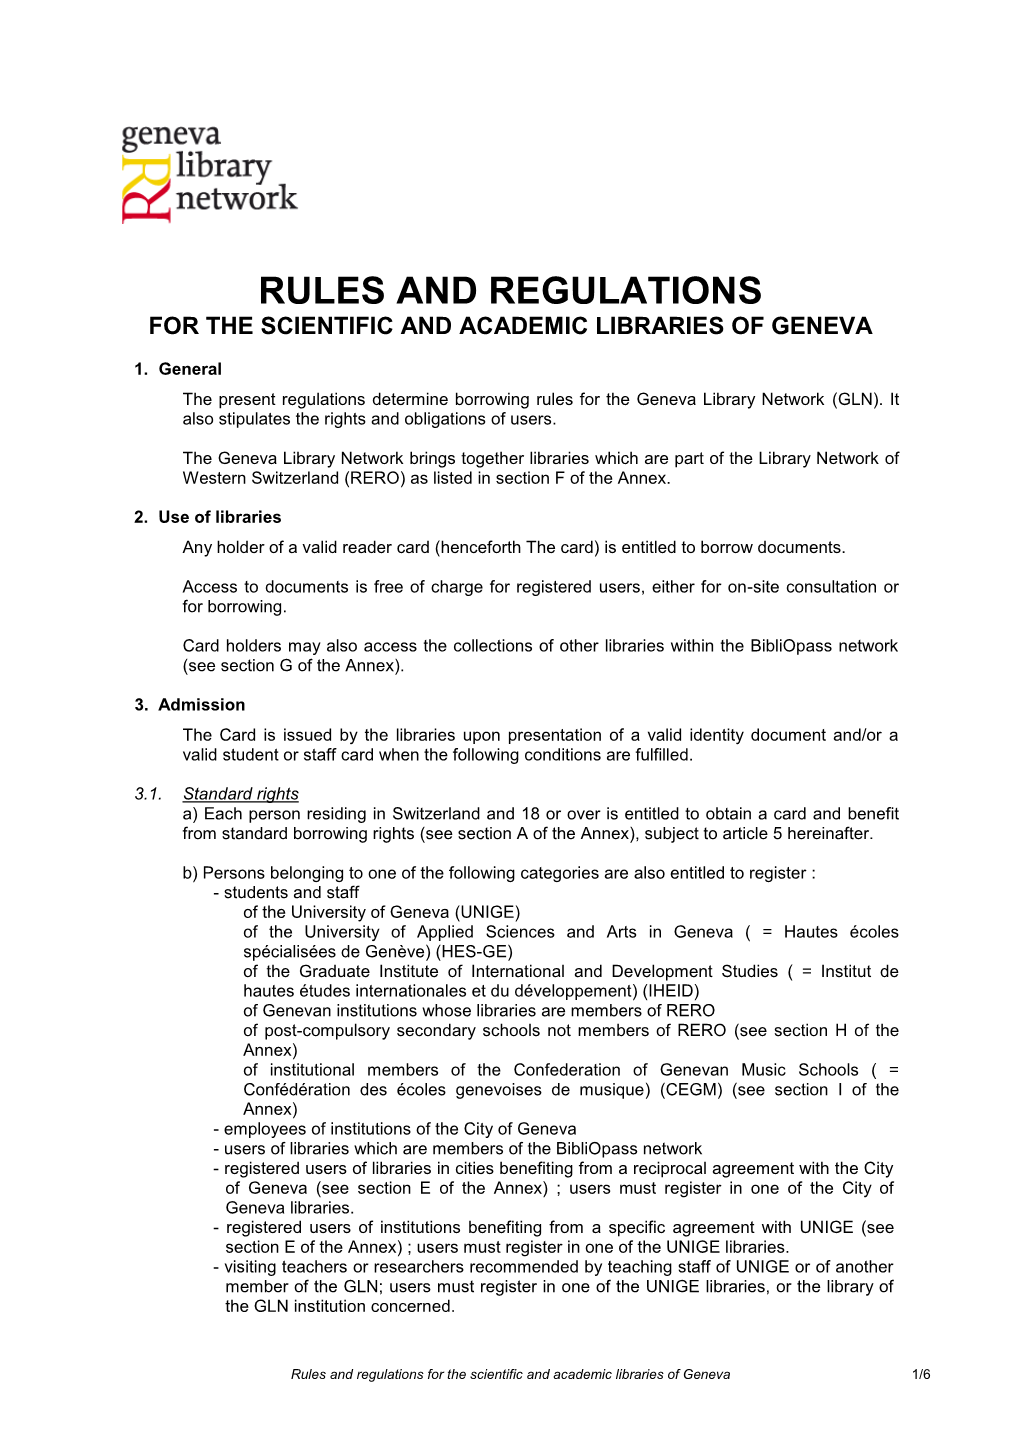 Rules and Regulations for the Scientific and Academic Libraries of Geneva